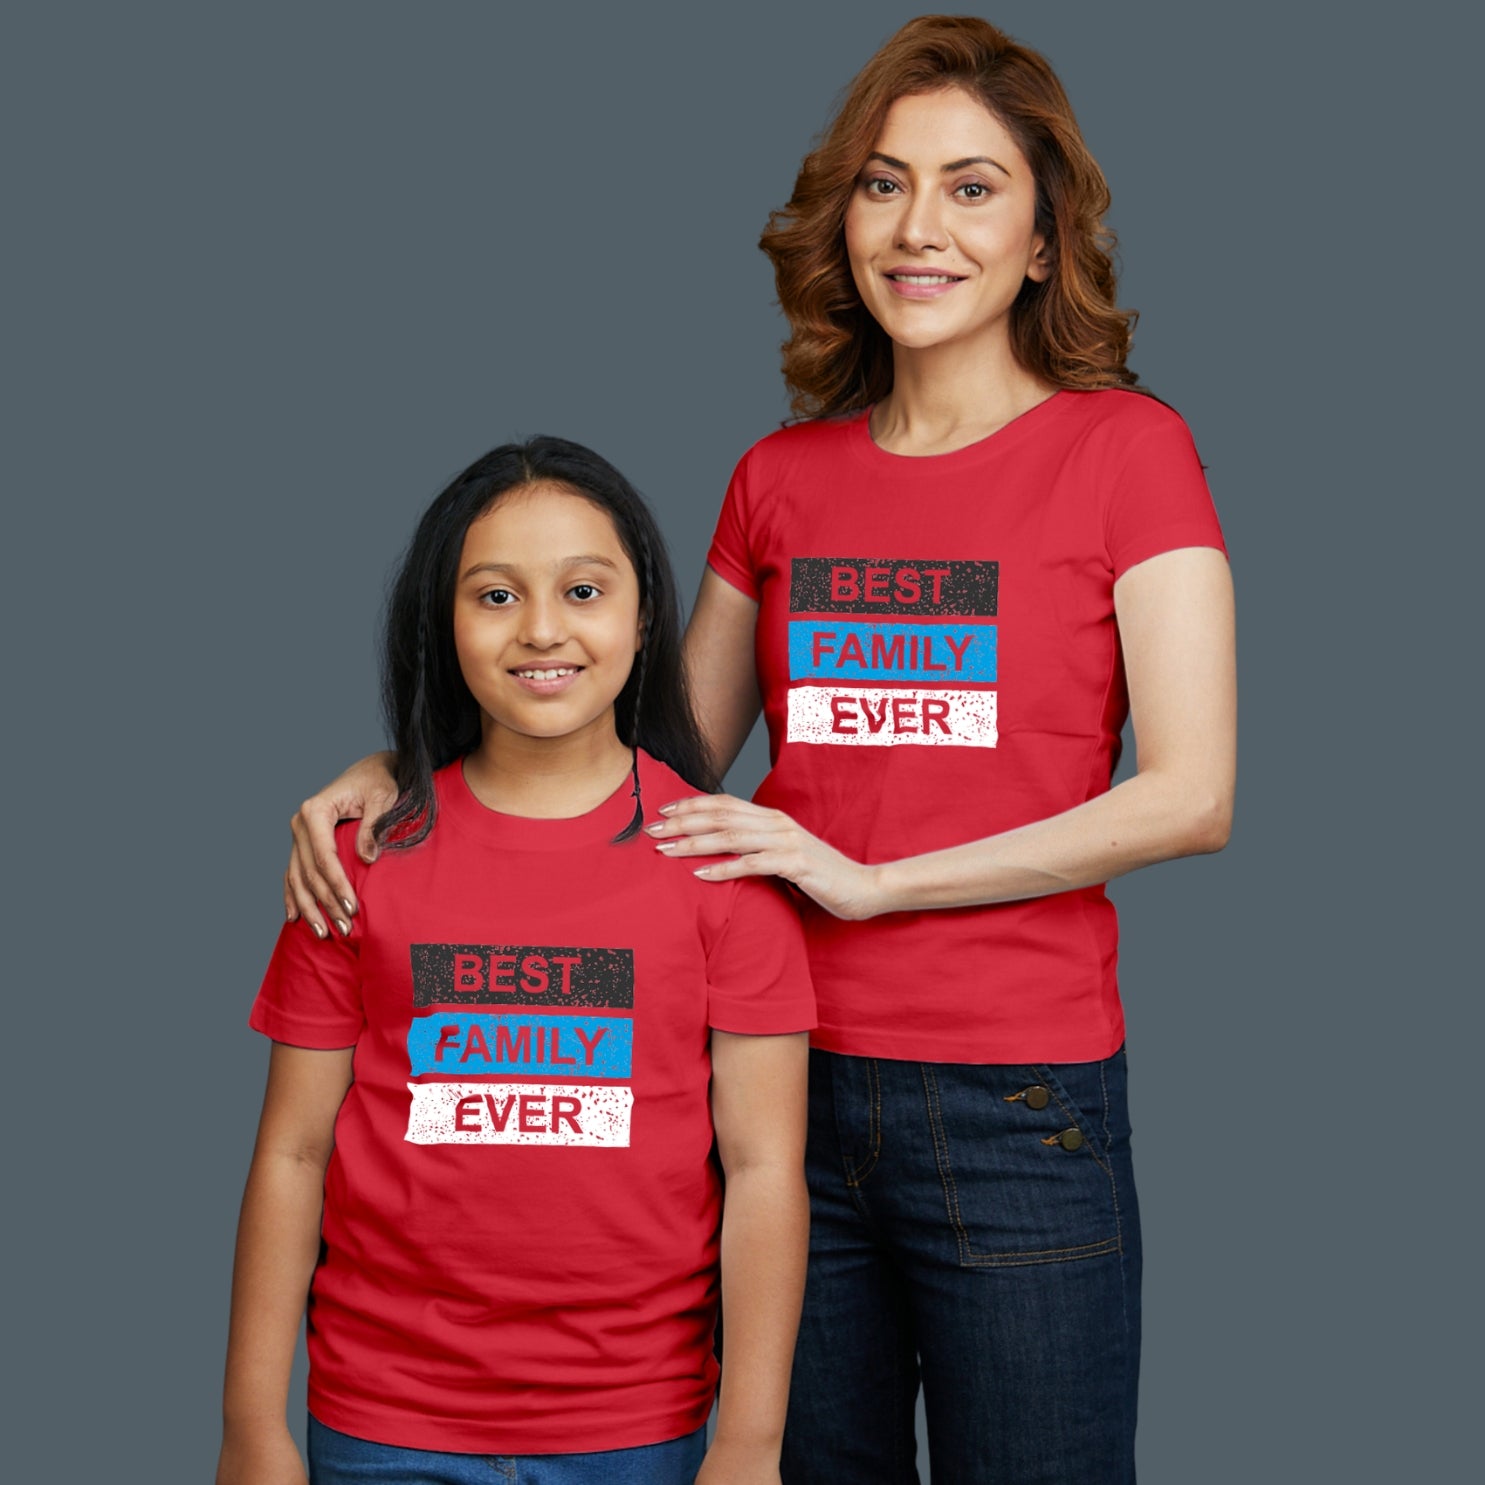 Family of 2 t shirt for Mom Daughter in Red Colour- Best Family Ever Variant